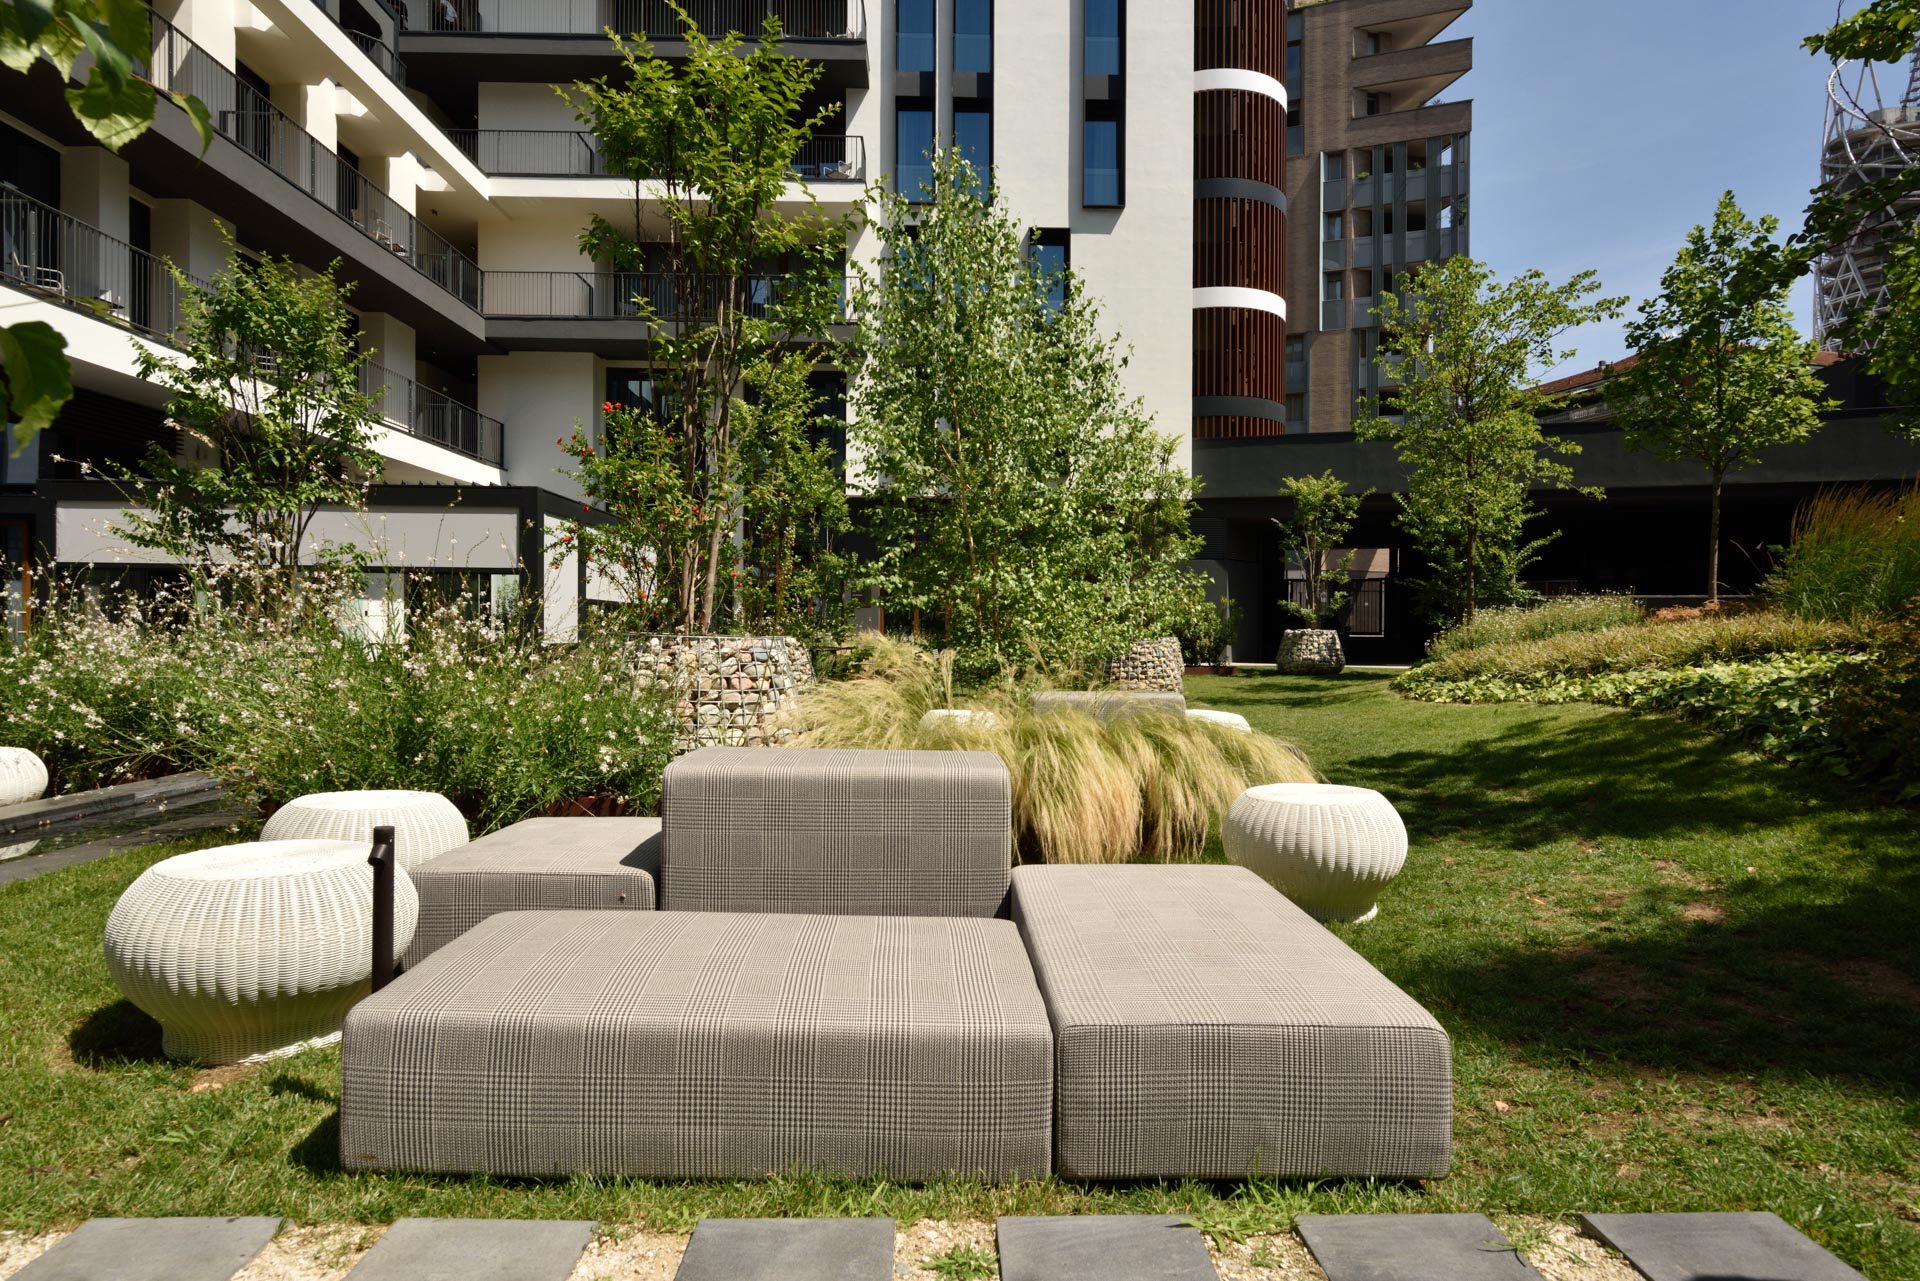 Gardens with sitting space